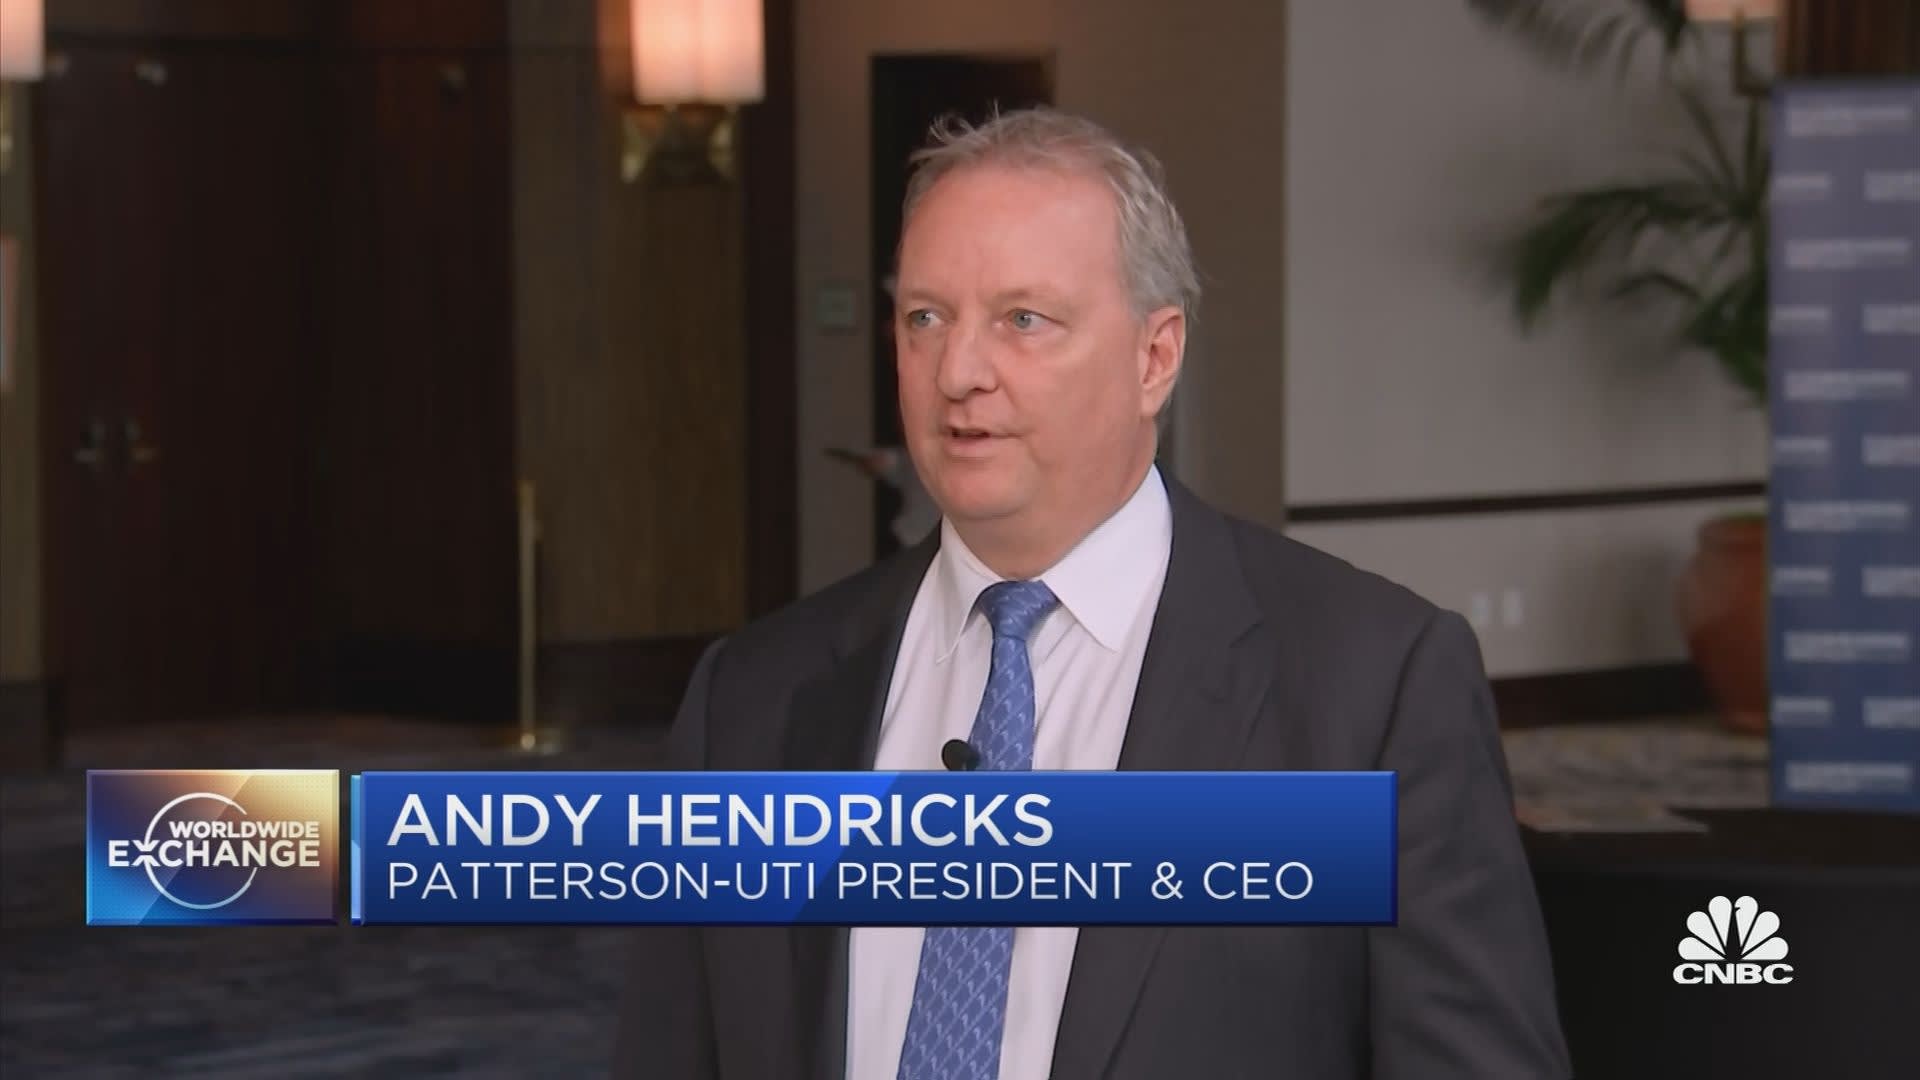 Patterson-UTI CEO Andy Hendricks on oil rig operations over the past year